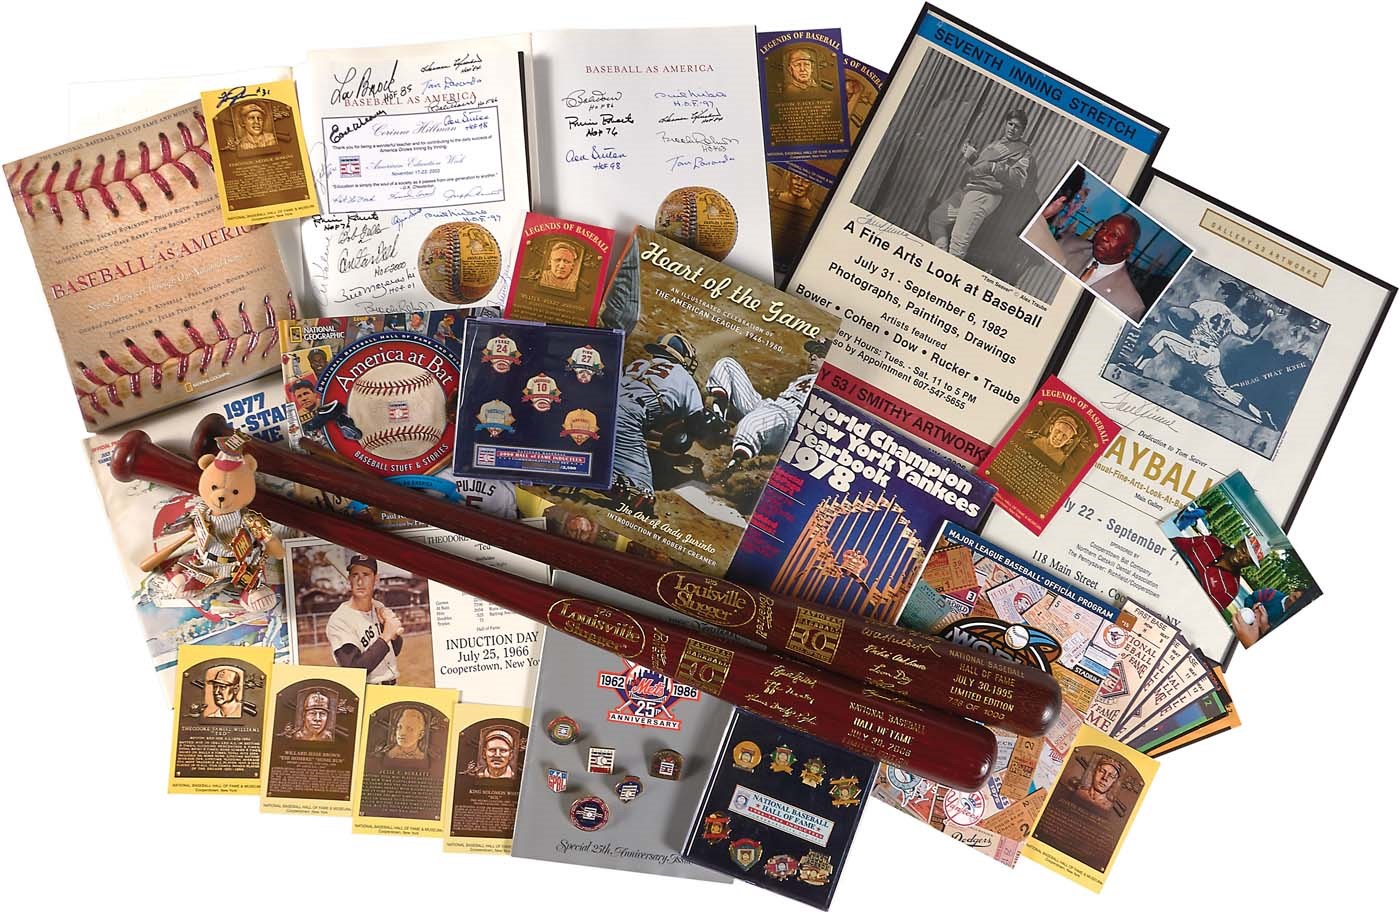 - Massive Hall of Fame Collection with Autographs from Cooperstown Employee (1000+)